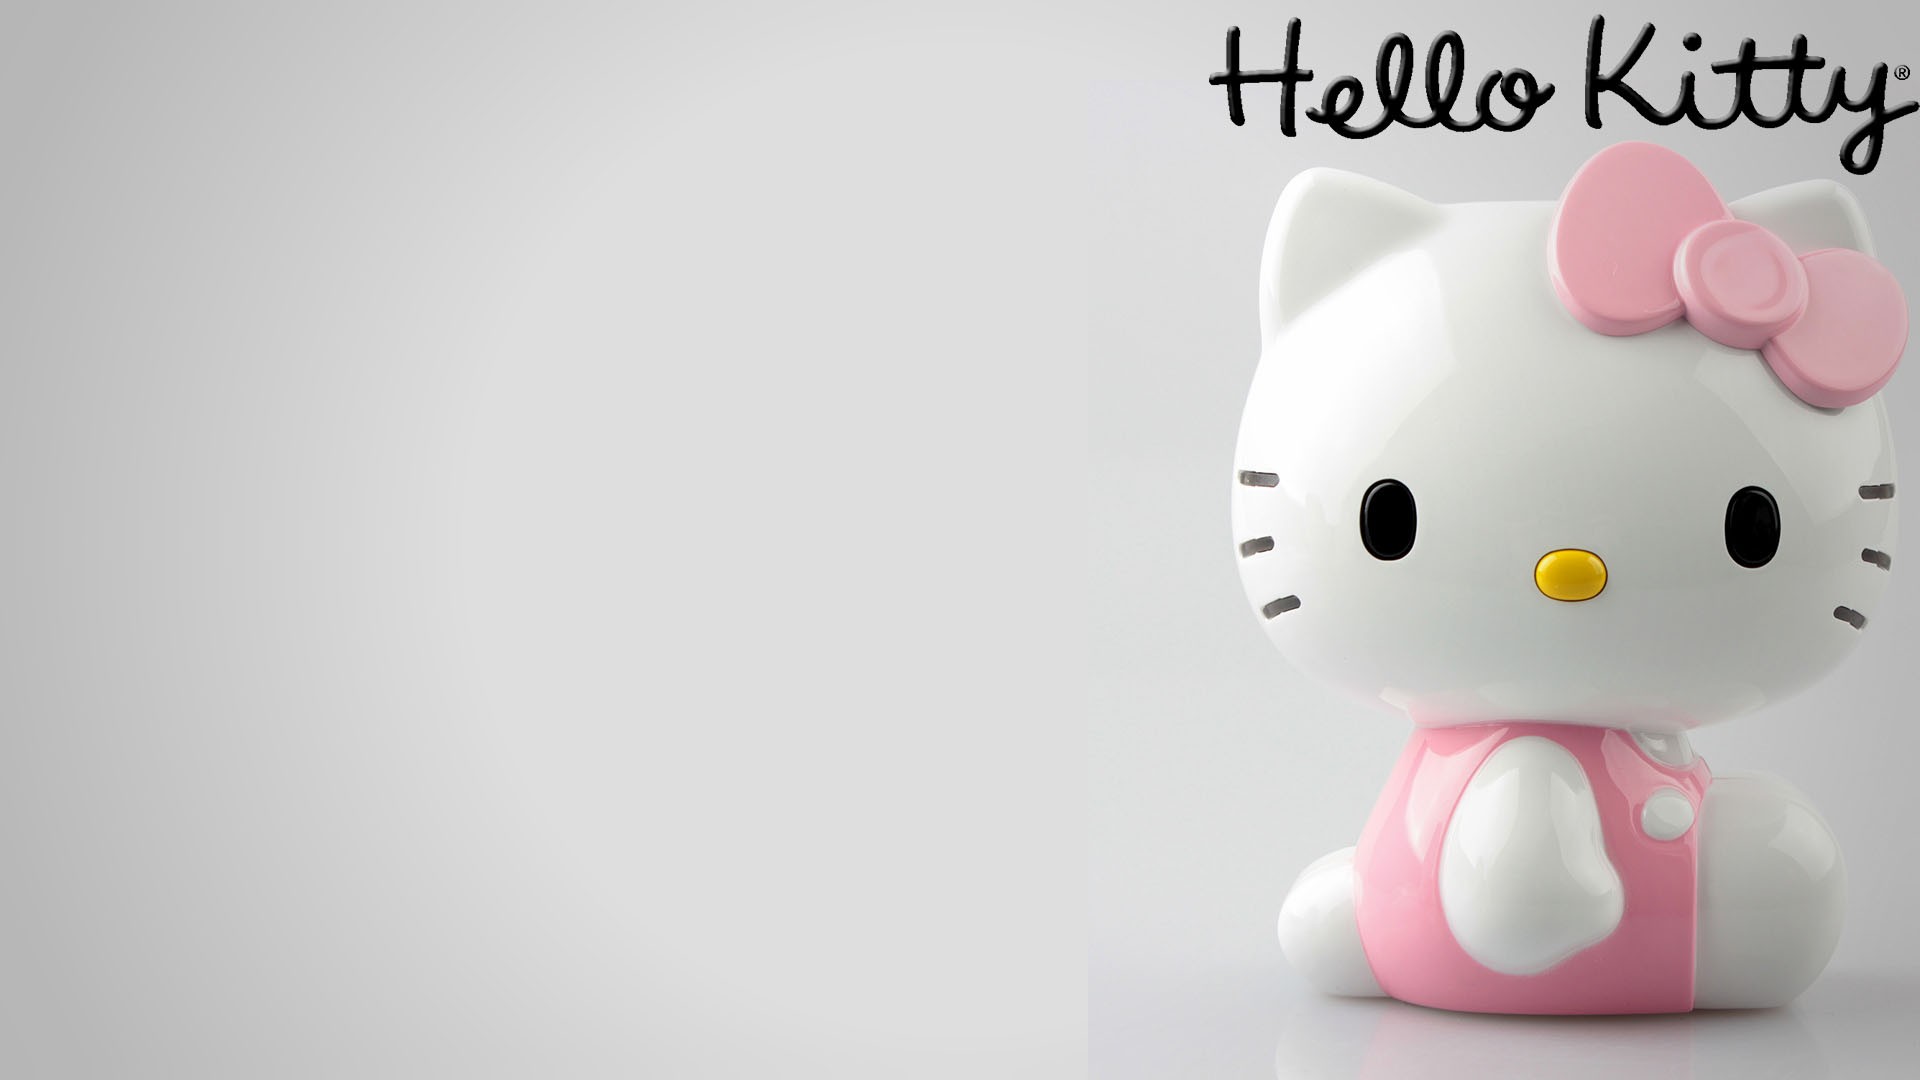 General 1920x1080 Hello Kitty toys simple background